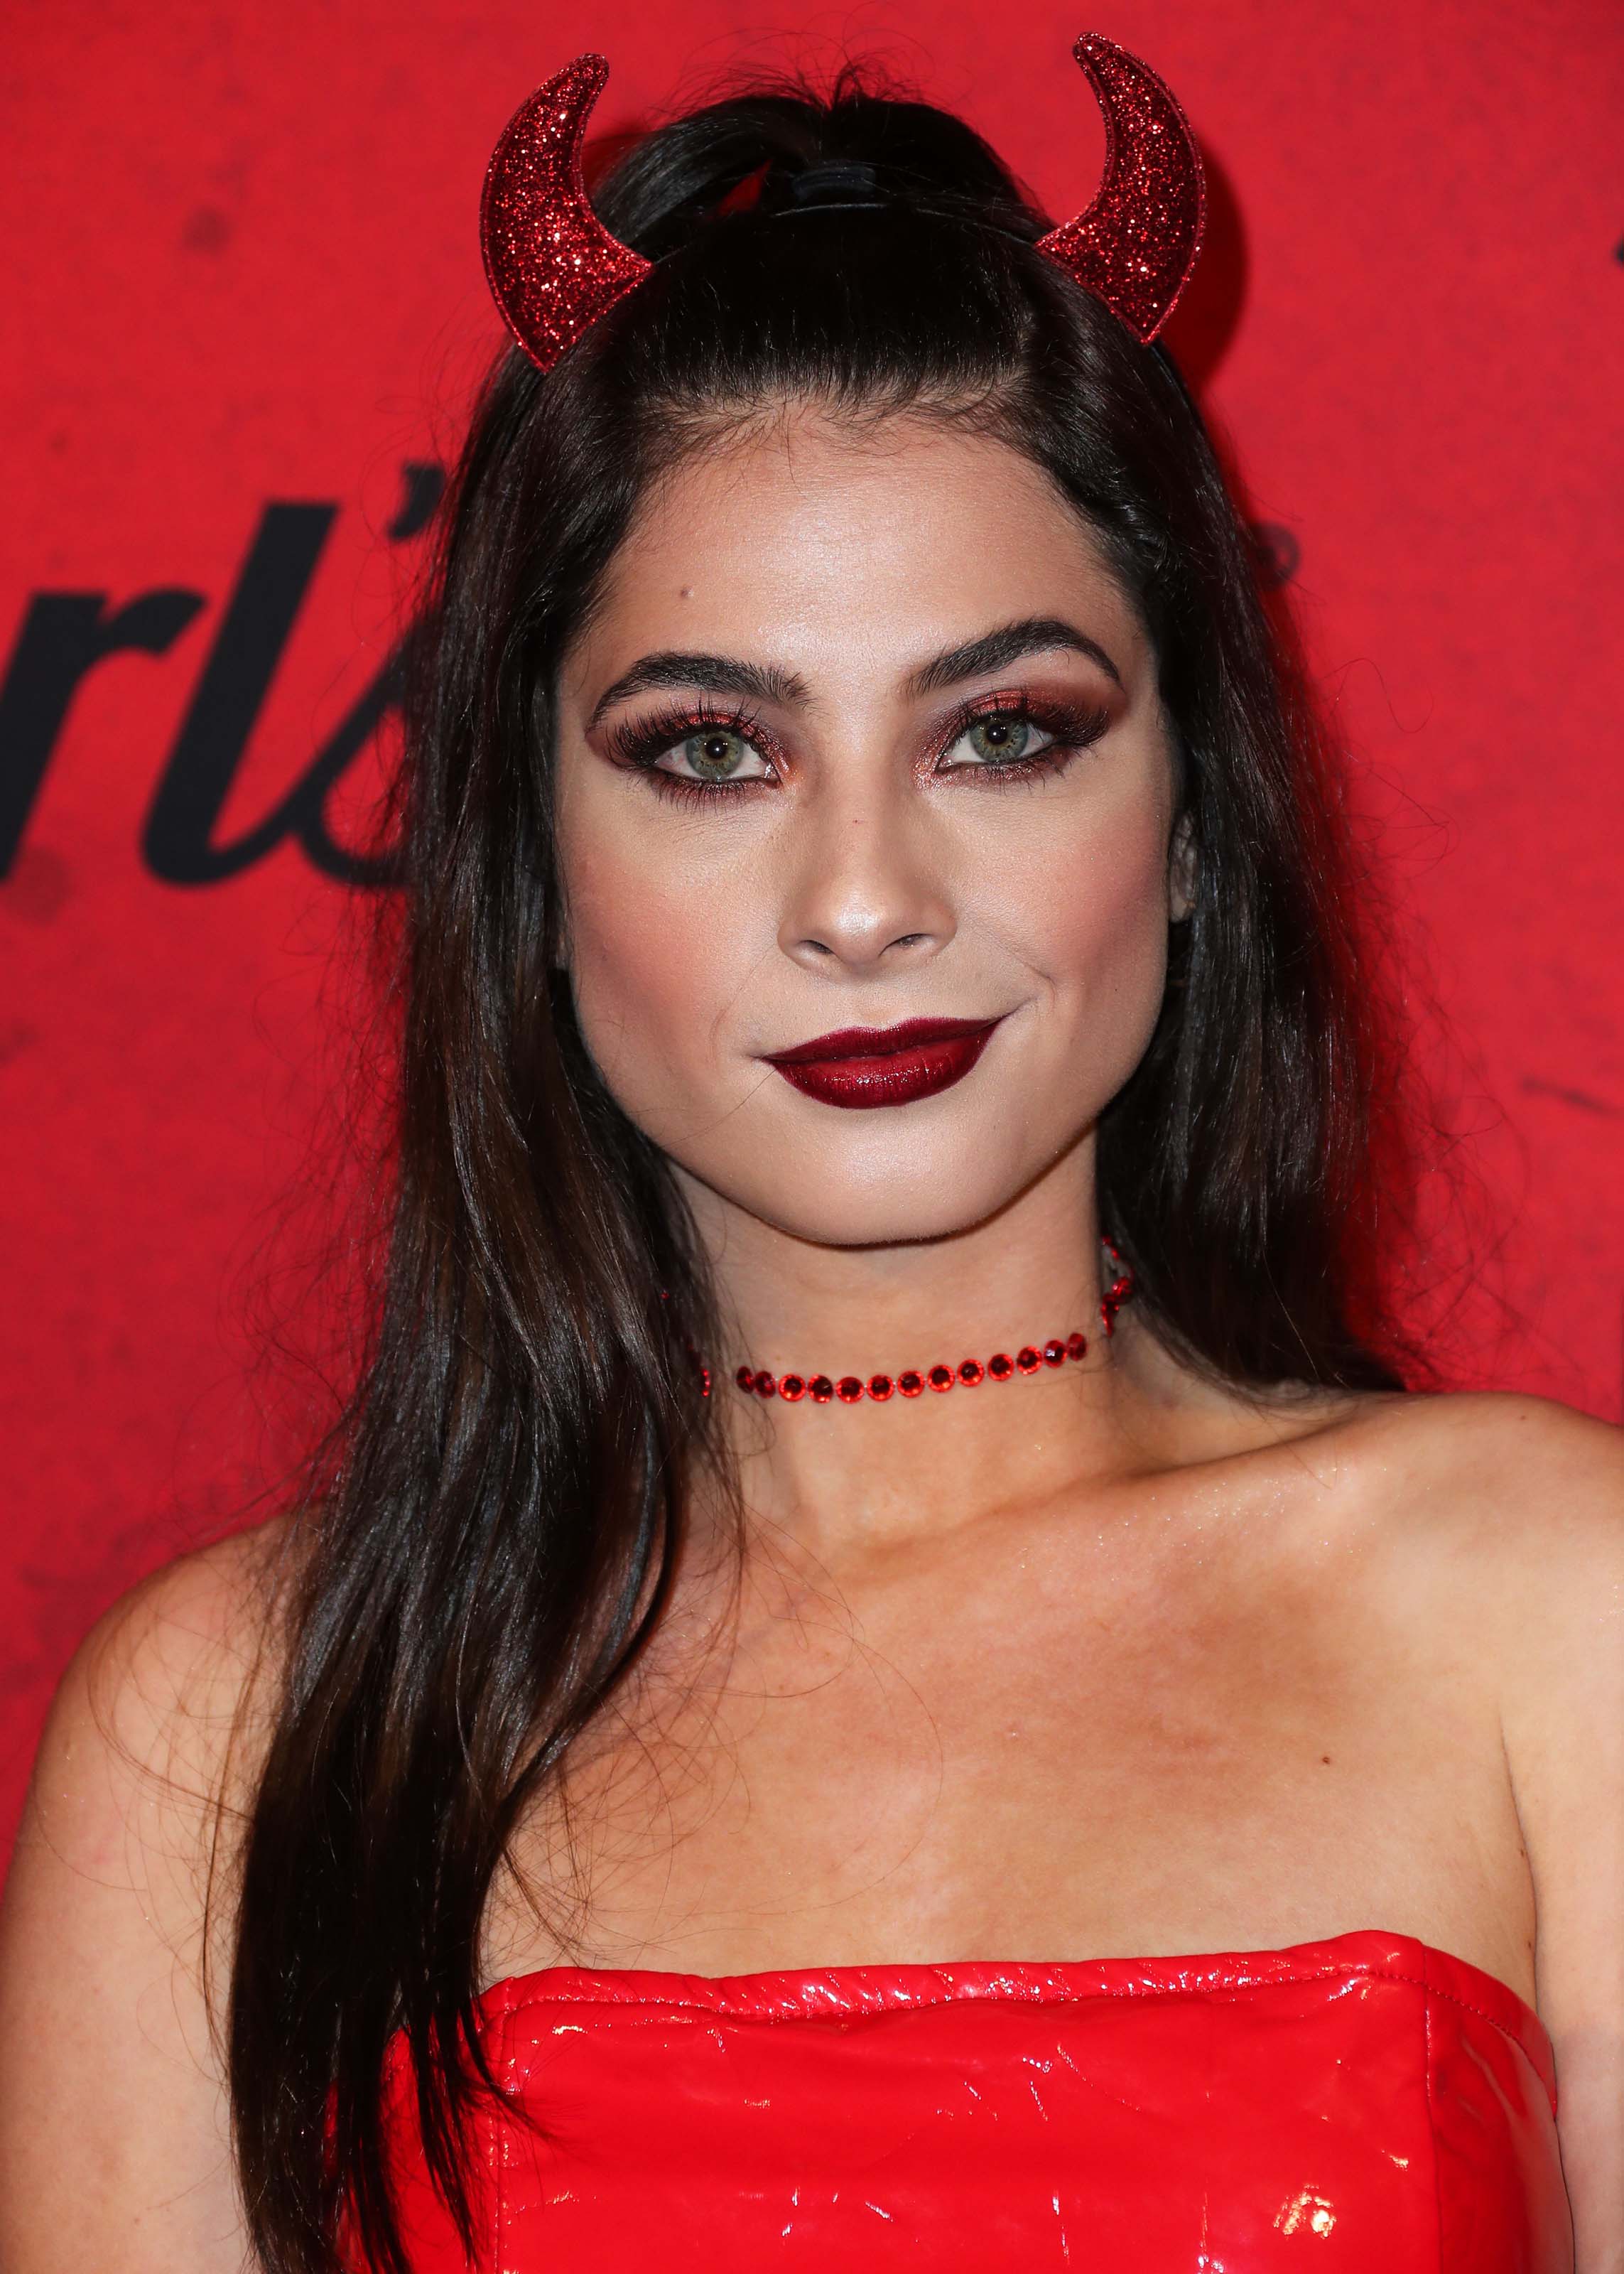 Niki Koss attends Just Jared’s 7th Annual Halloween Party